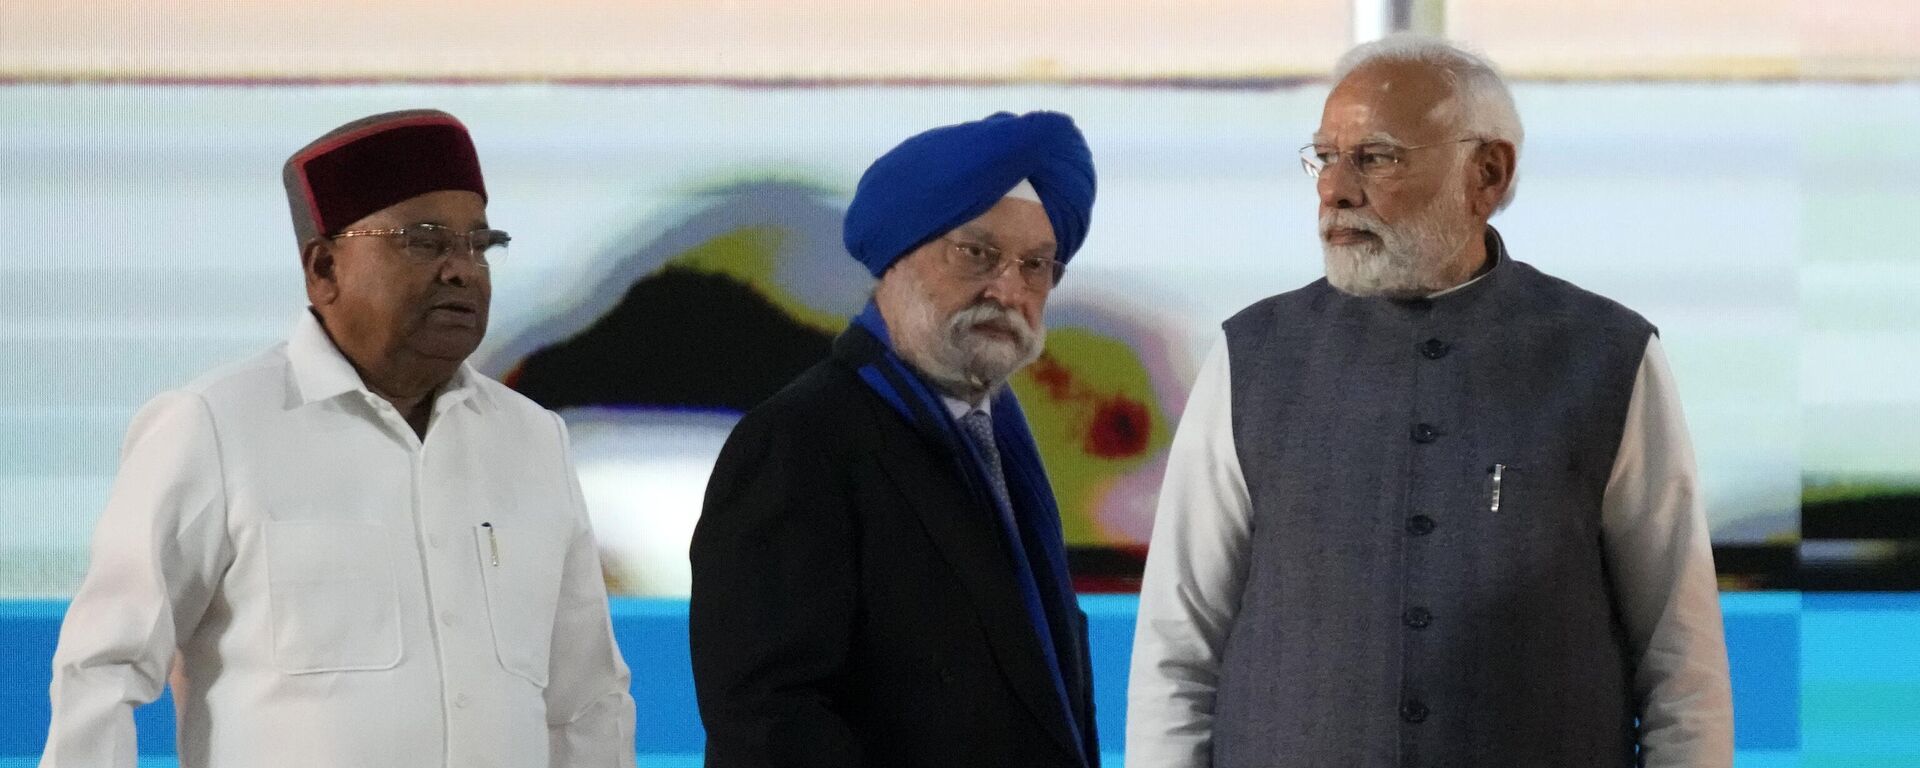 Indian Prime Minister Narendra Modi, right, watches as his colleague and minister for petroleum and natural gas Hardeep Singh Puri, center, walks to address a gathering at the 'India Energy Week 2023' in Bengaluru, India, Monday, Feb. 6, 2023. - Sputnik India, 1920, 15.03.2023